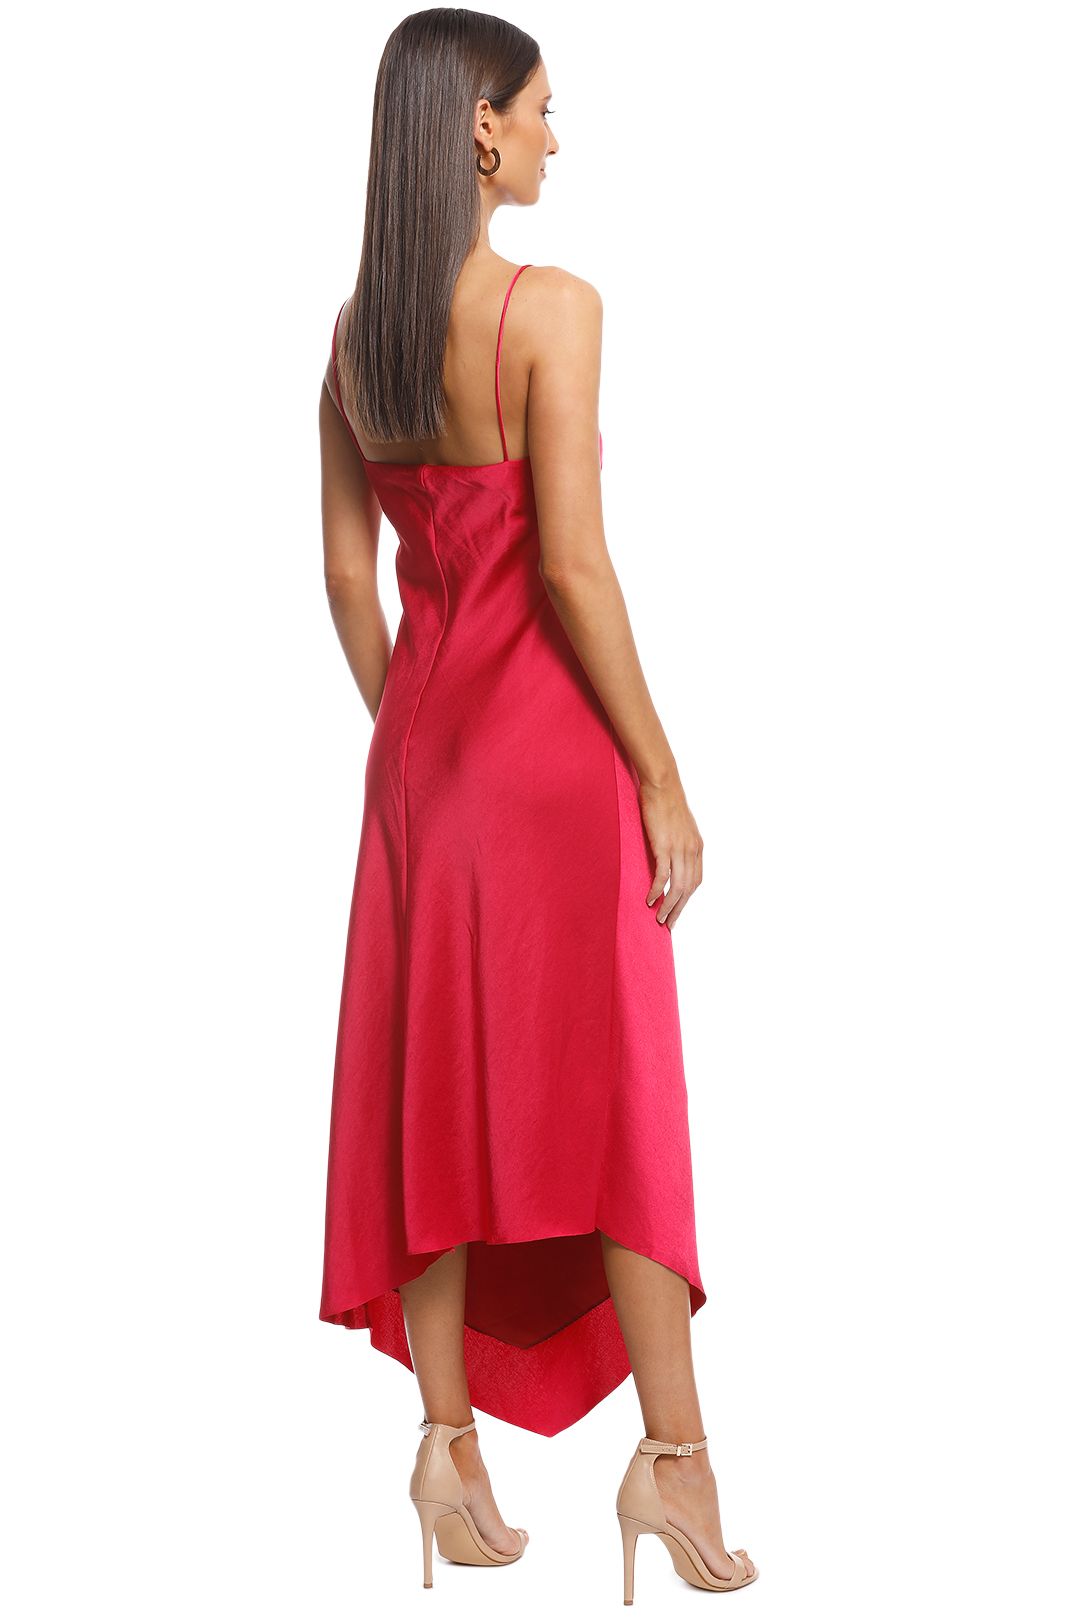 Camilla and Marc - Sirocco Slip Dress - Pink - Back